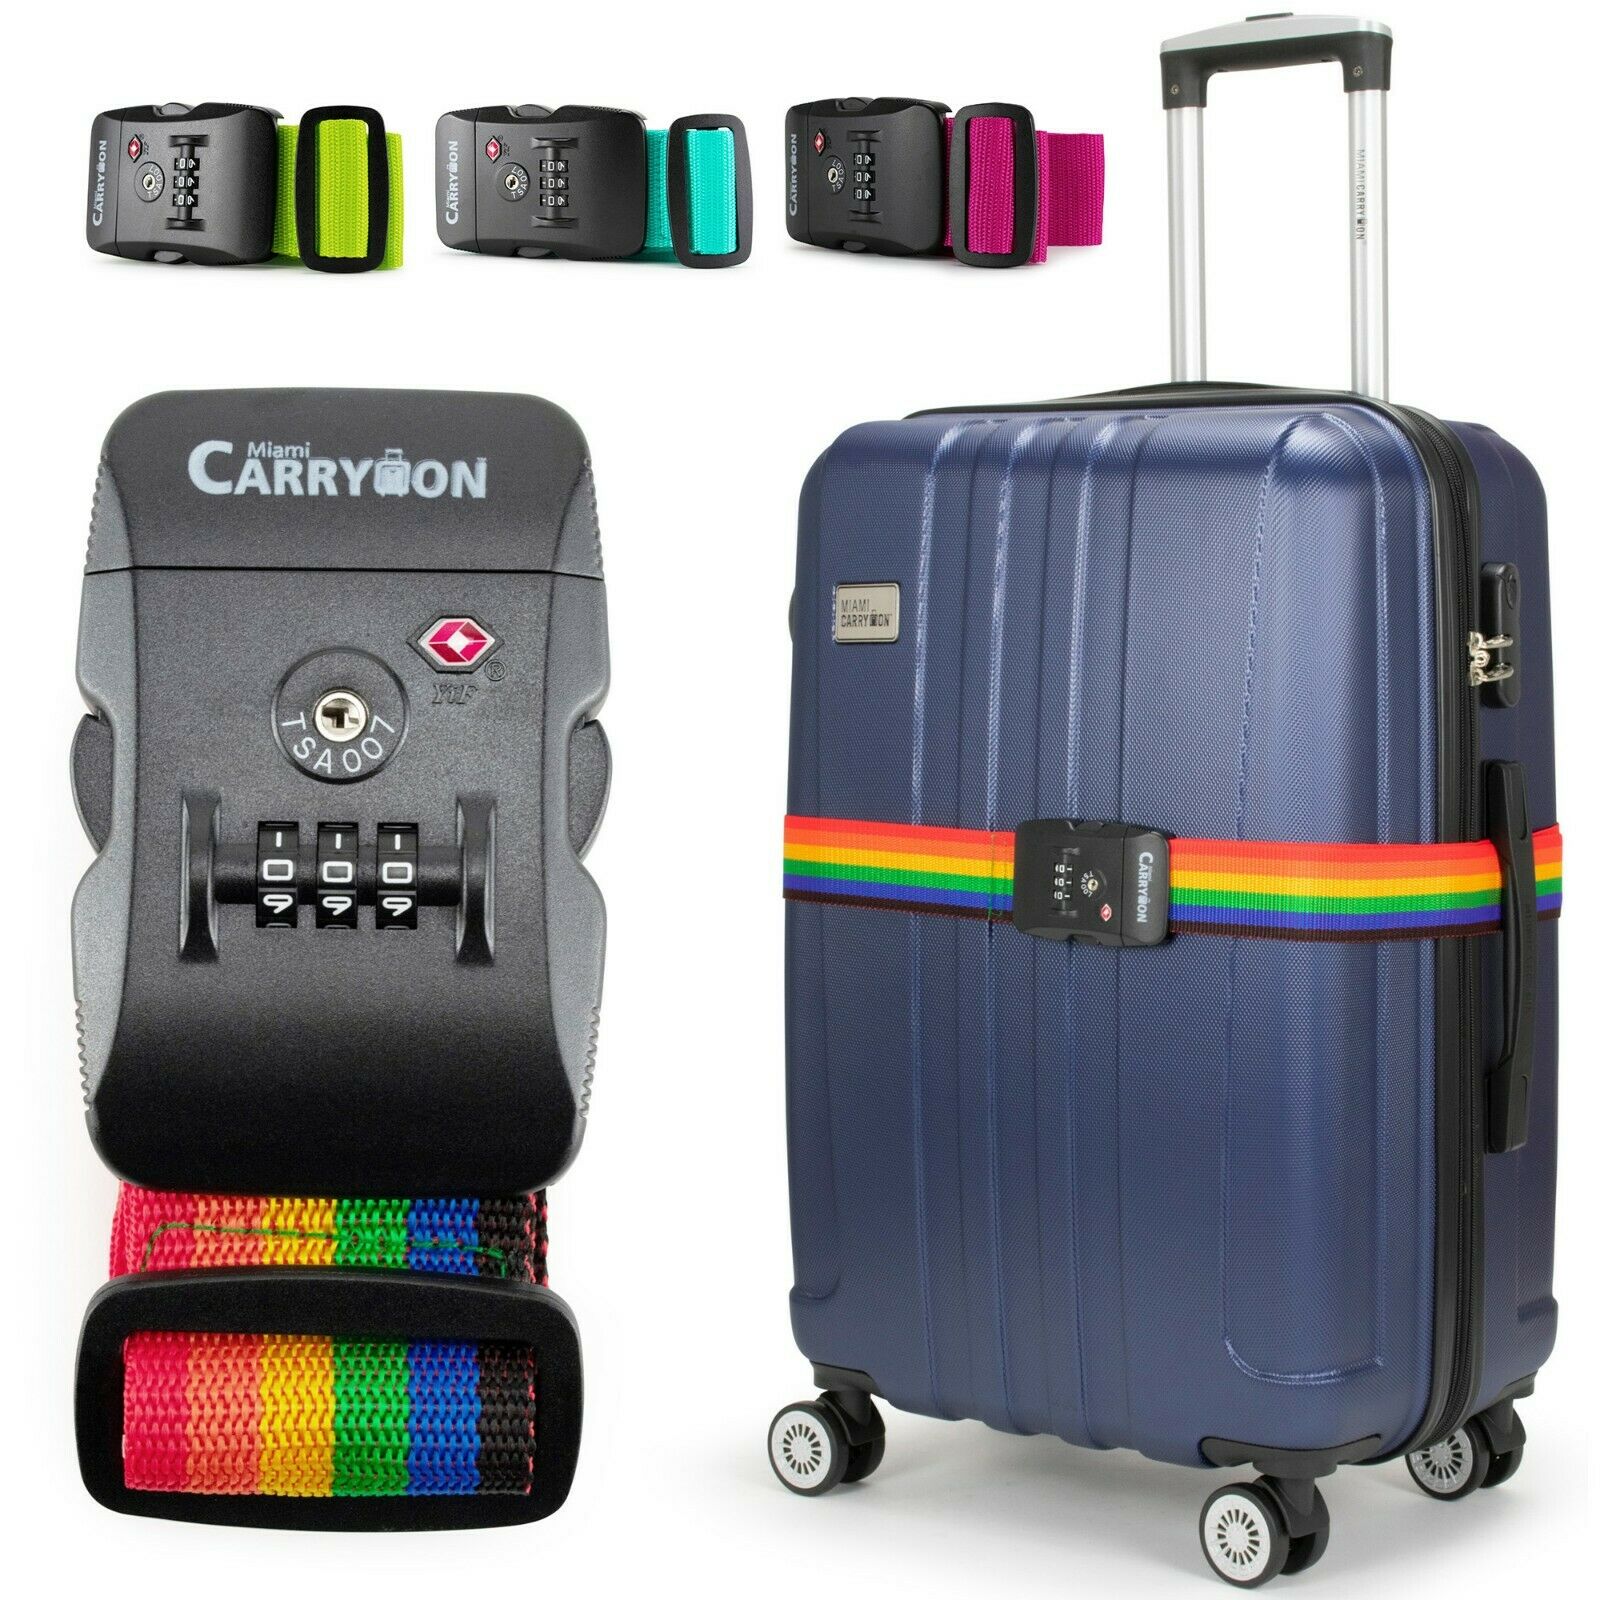 Miami Carryon Adjustable Luggage Strap With A Built-in Tsa Combination Lock